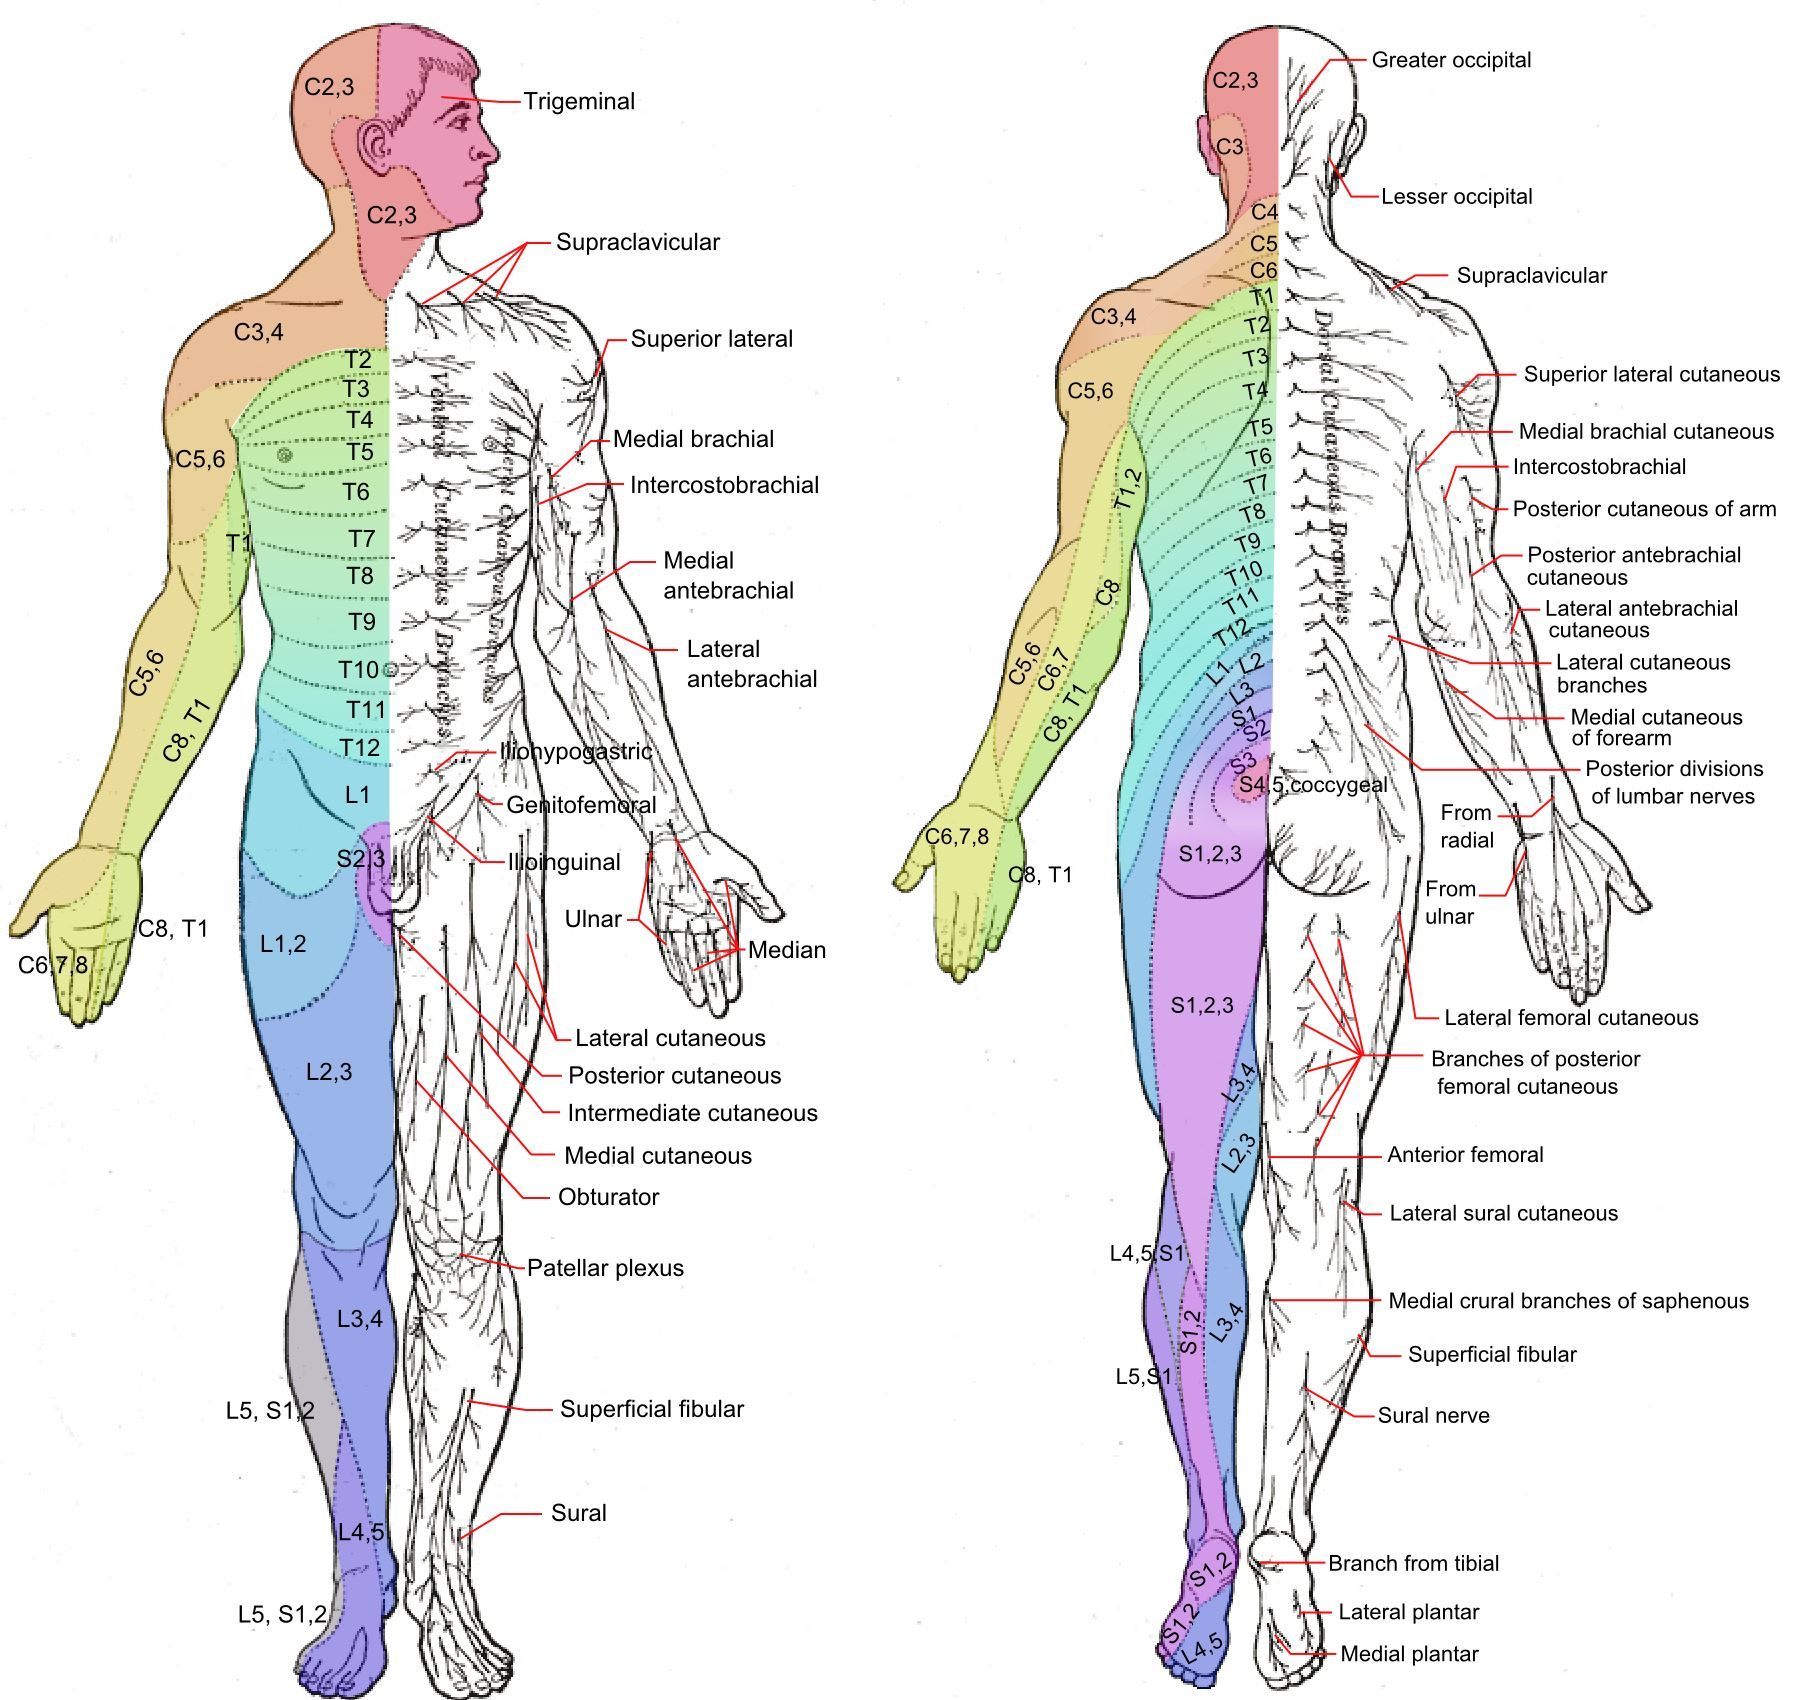 Major Dermatomes And Cutaneous Nerves Anterior And GrepMed